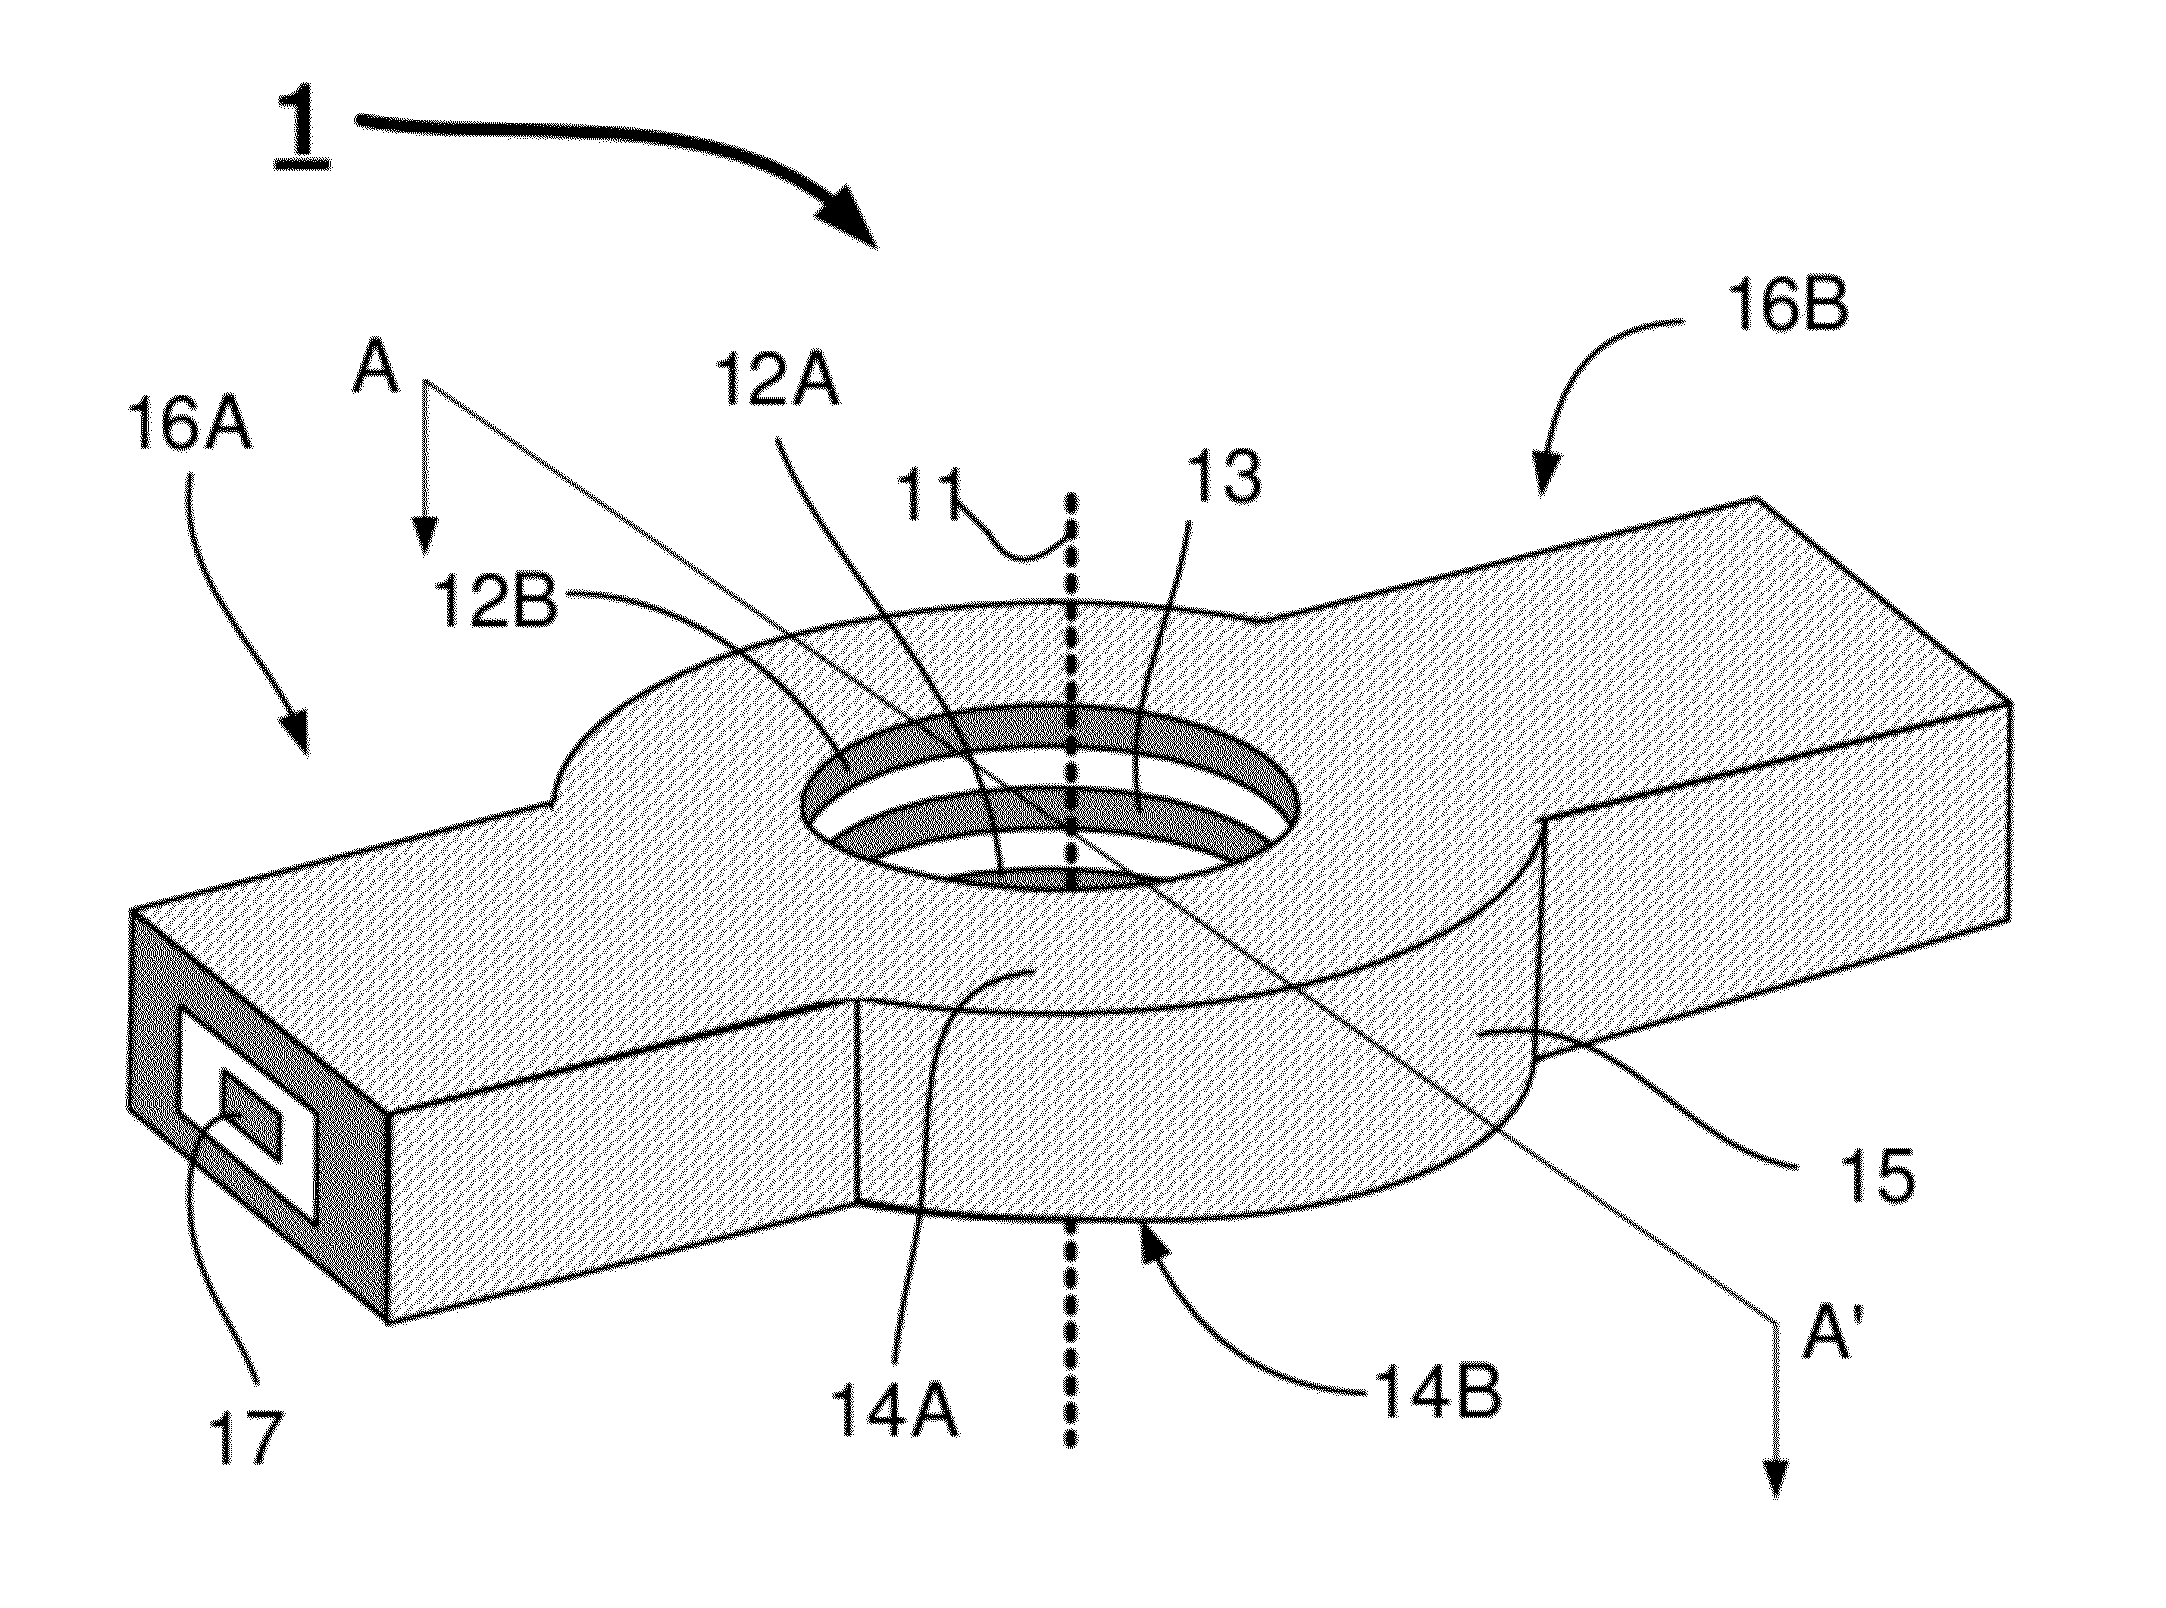 Method for centering an optical element in a TEM comprising a contrast enhancing element